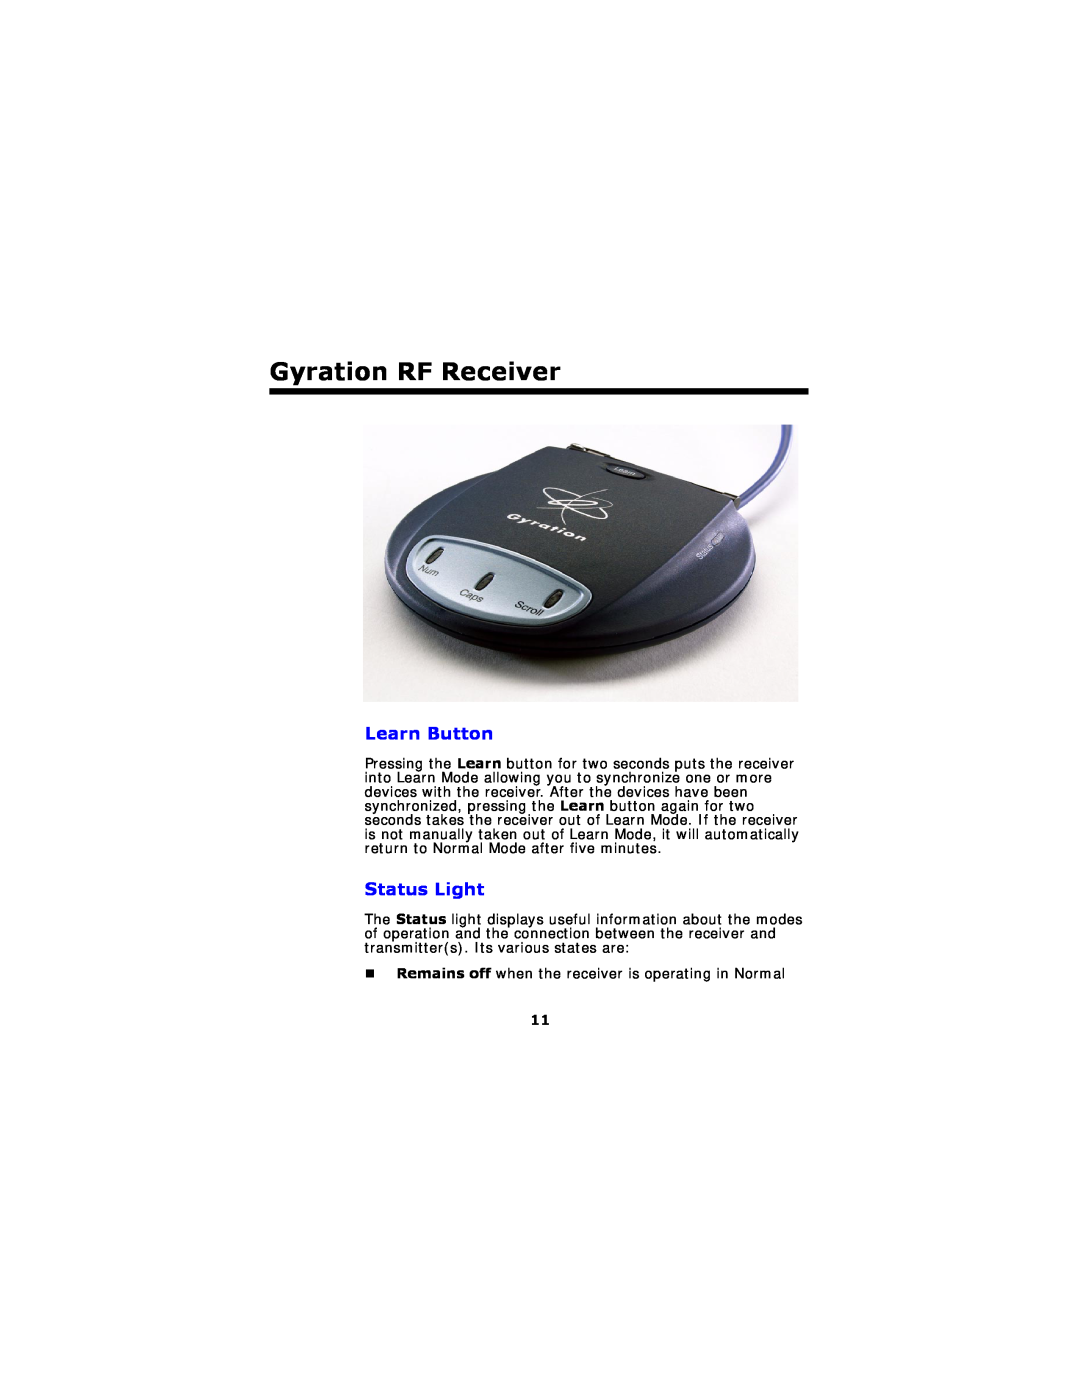 Gyration Ultra Cordless Optical Mouse user manual Gyration RF Receiver, Learn Button, Status Light 